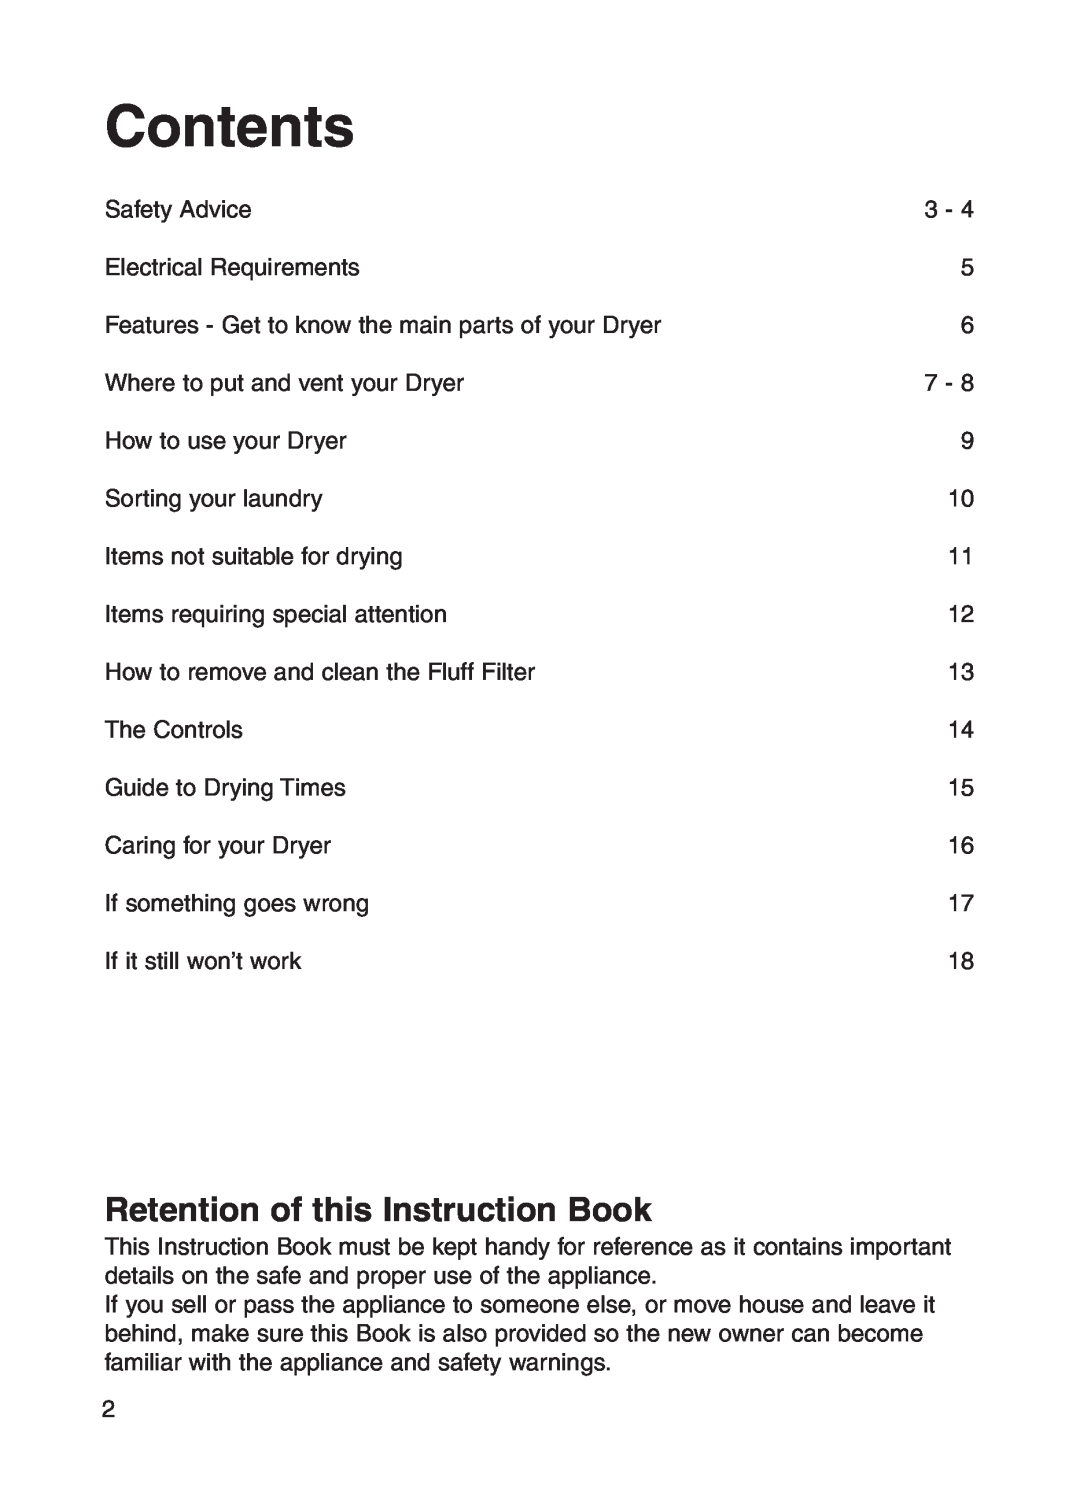 Indesit G73V manual Contents, Retention of this Instruction Book 